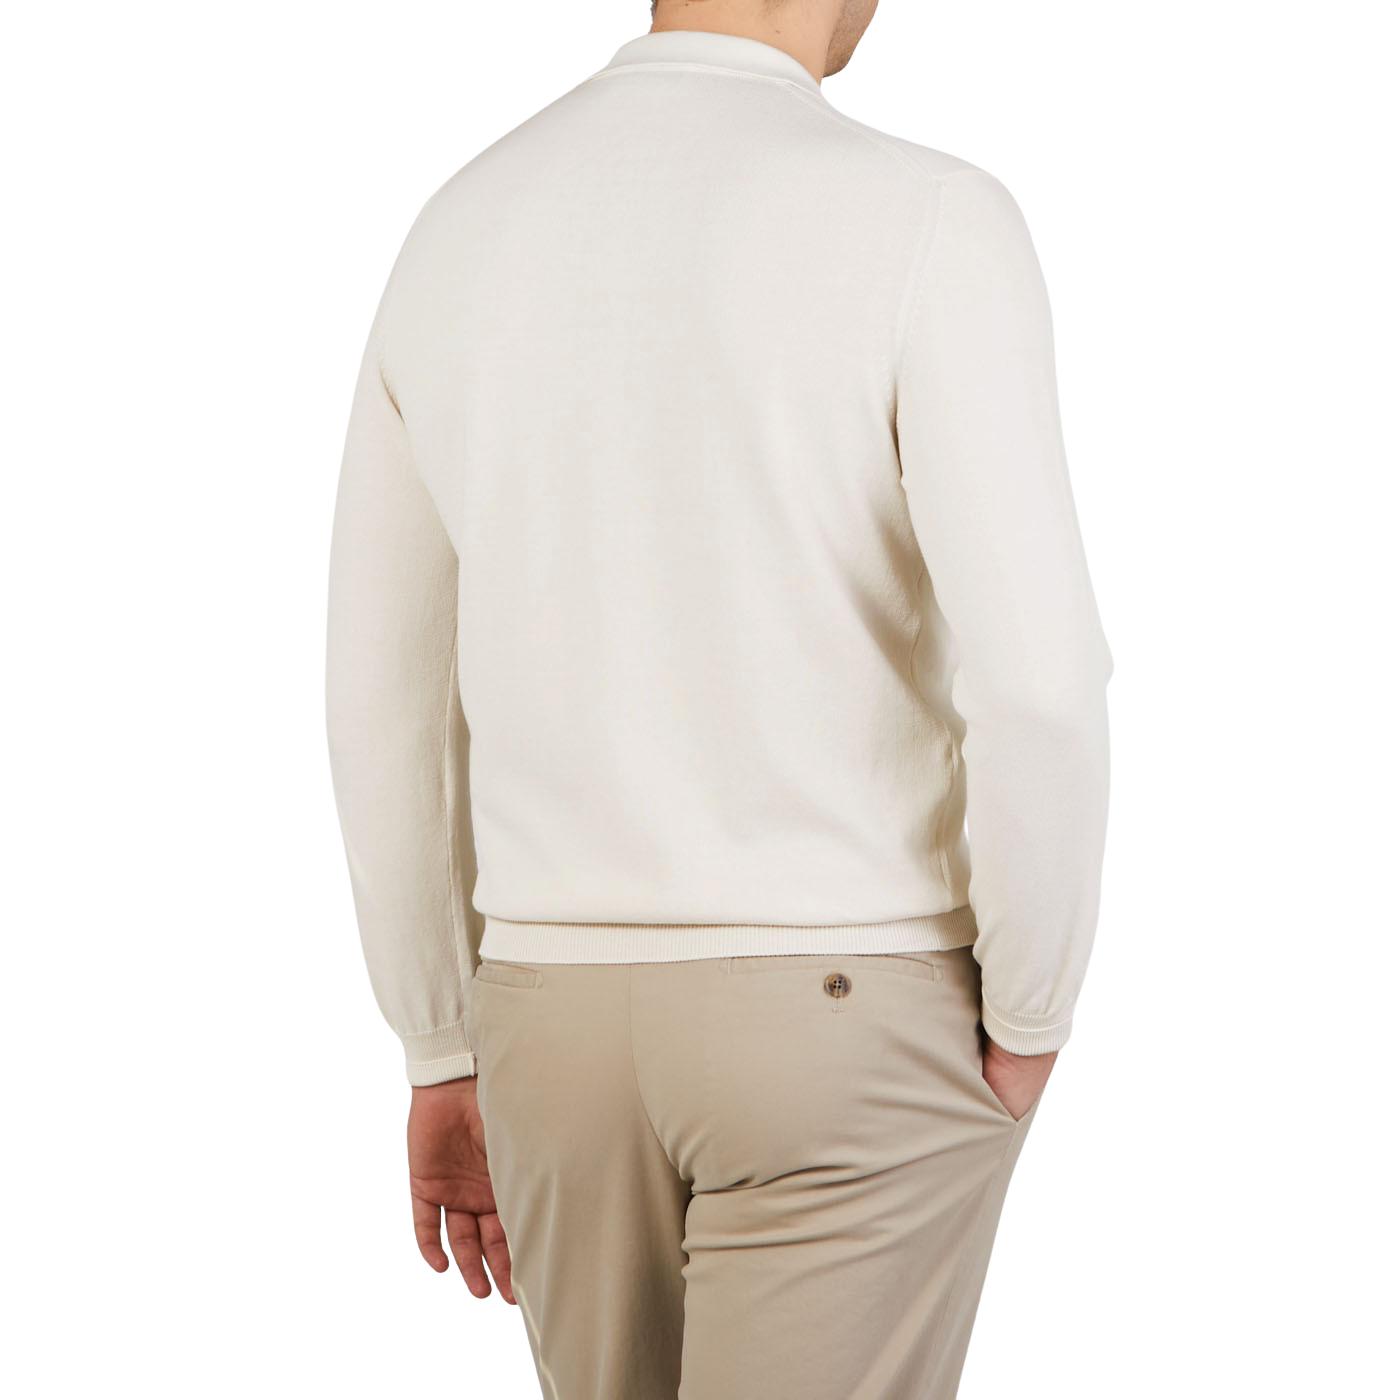 The back view of a man wearing a Mauro Ottaviani Light Beige Supima Cotton LS Polo Shirt and tan pants.